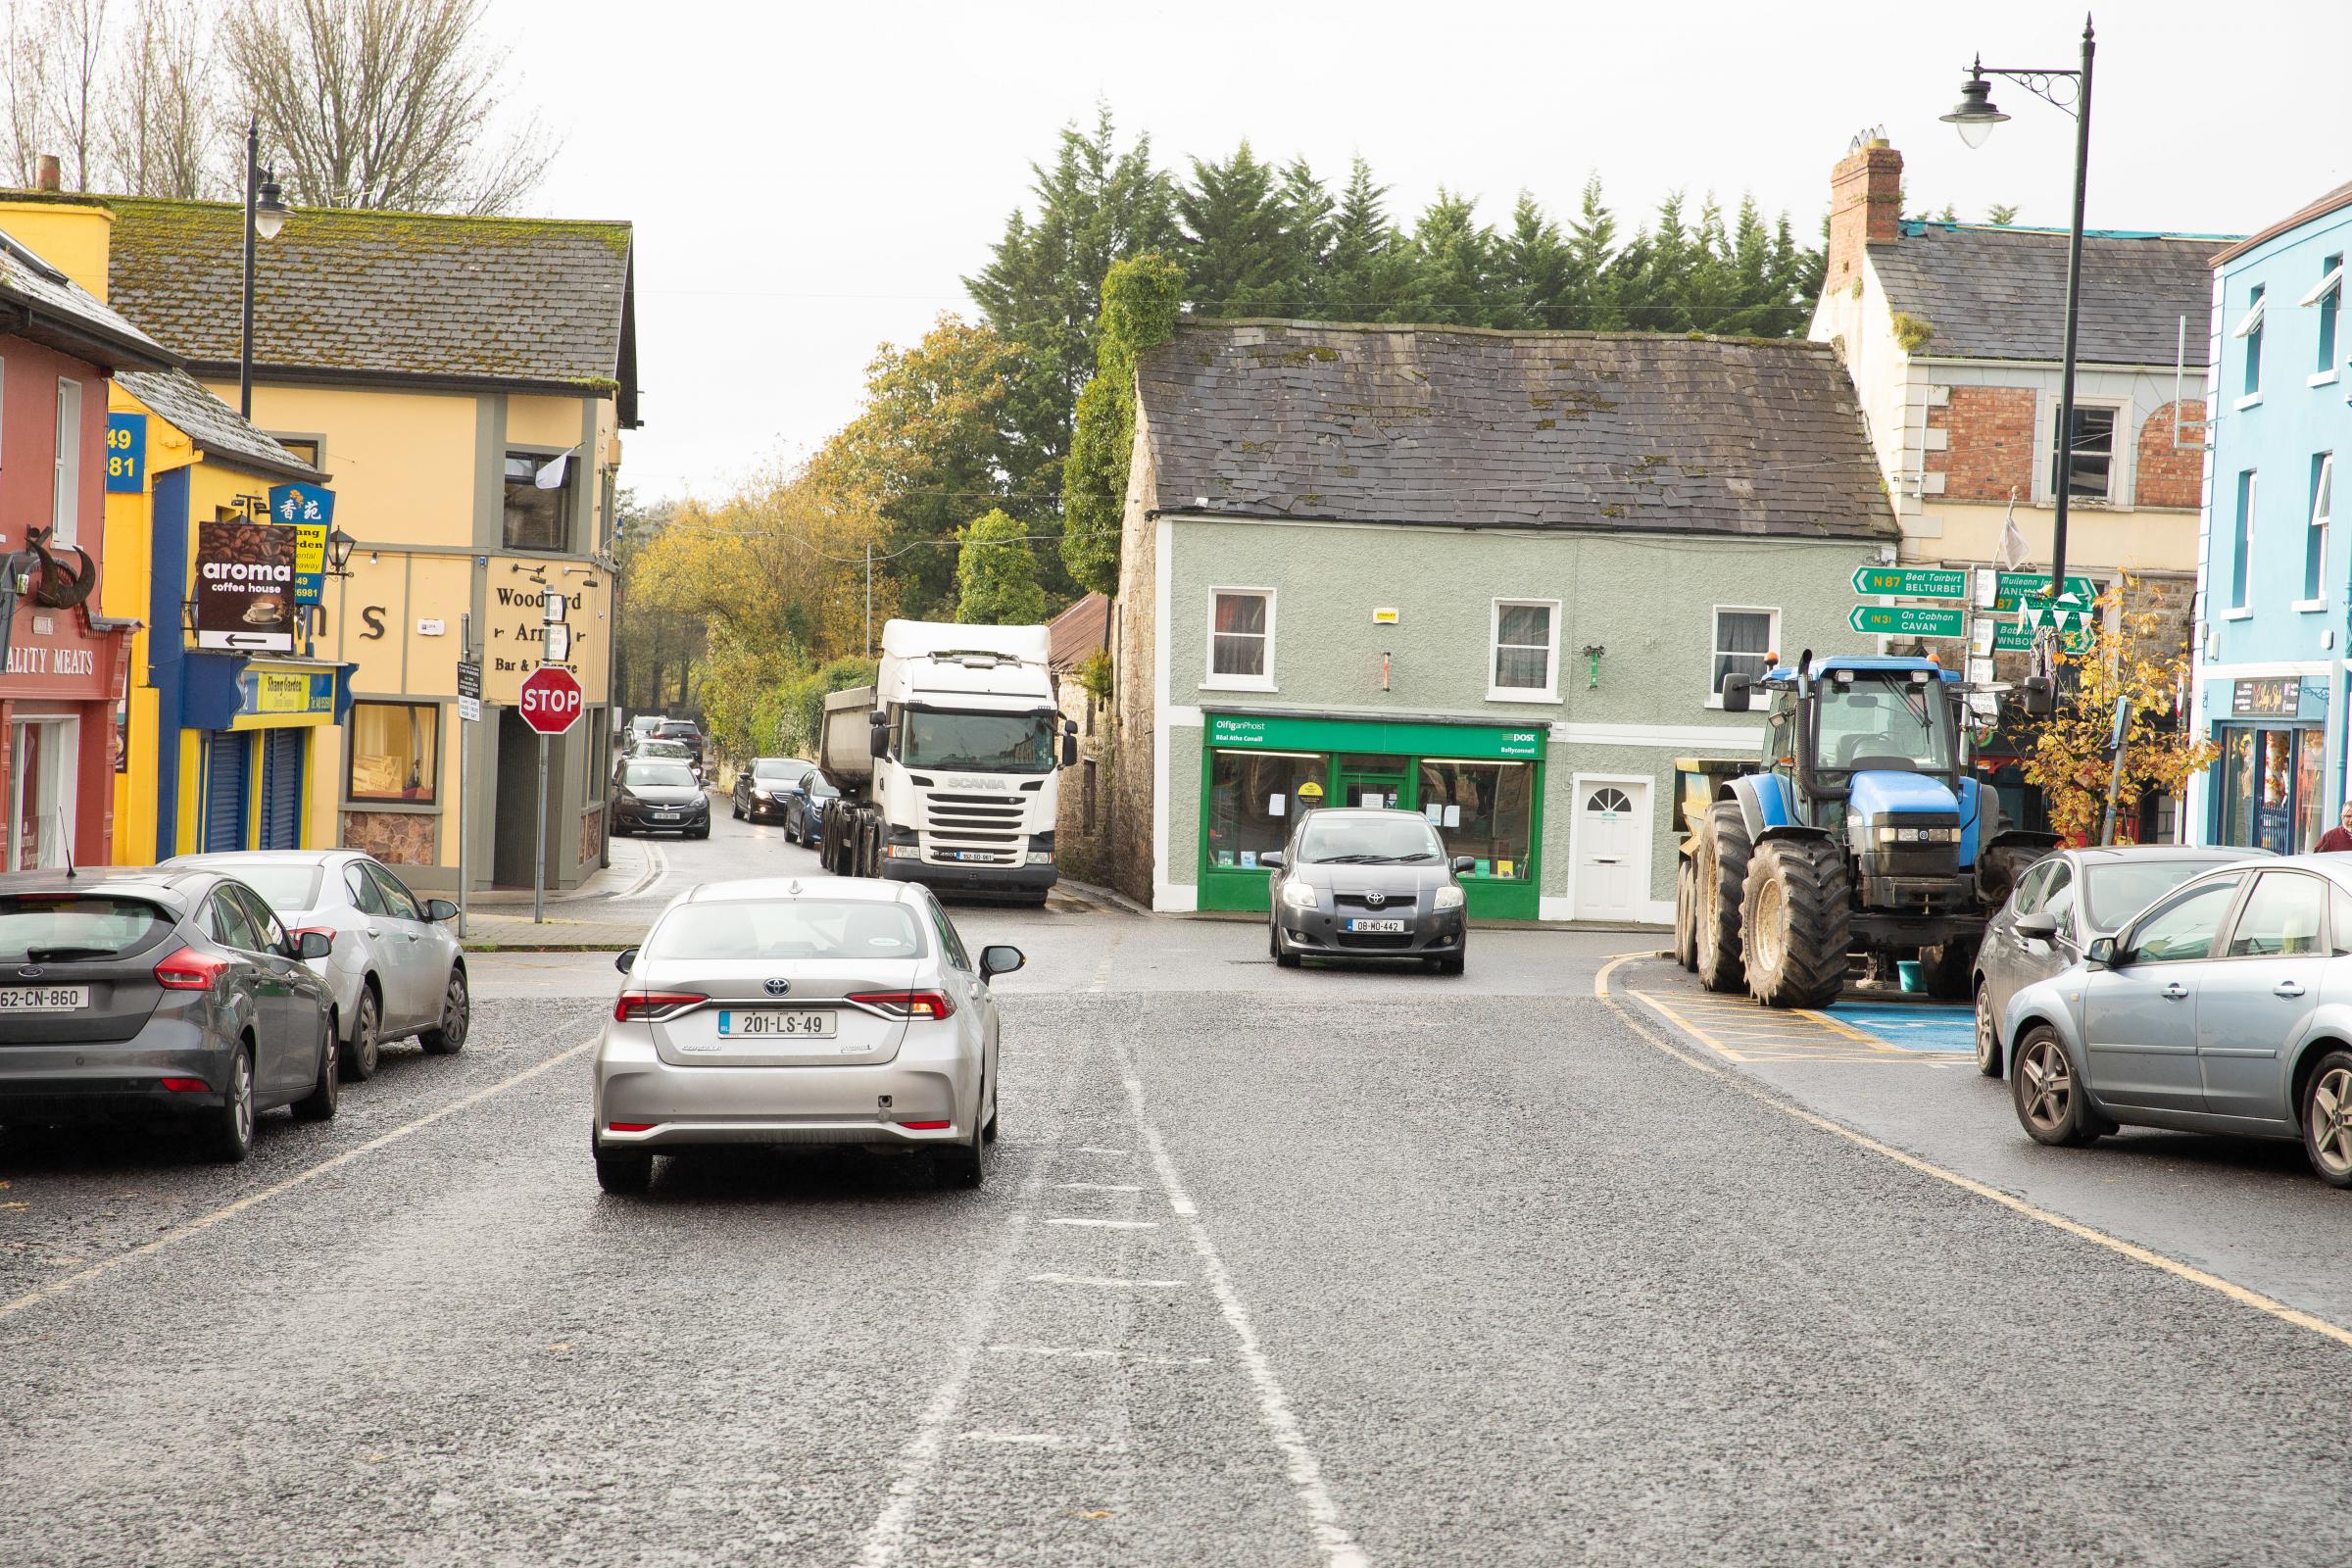 In the heart of busy Ballyconnell. Photos by Tim Flaherty.